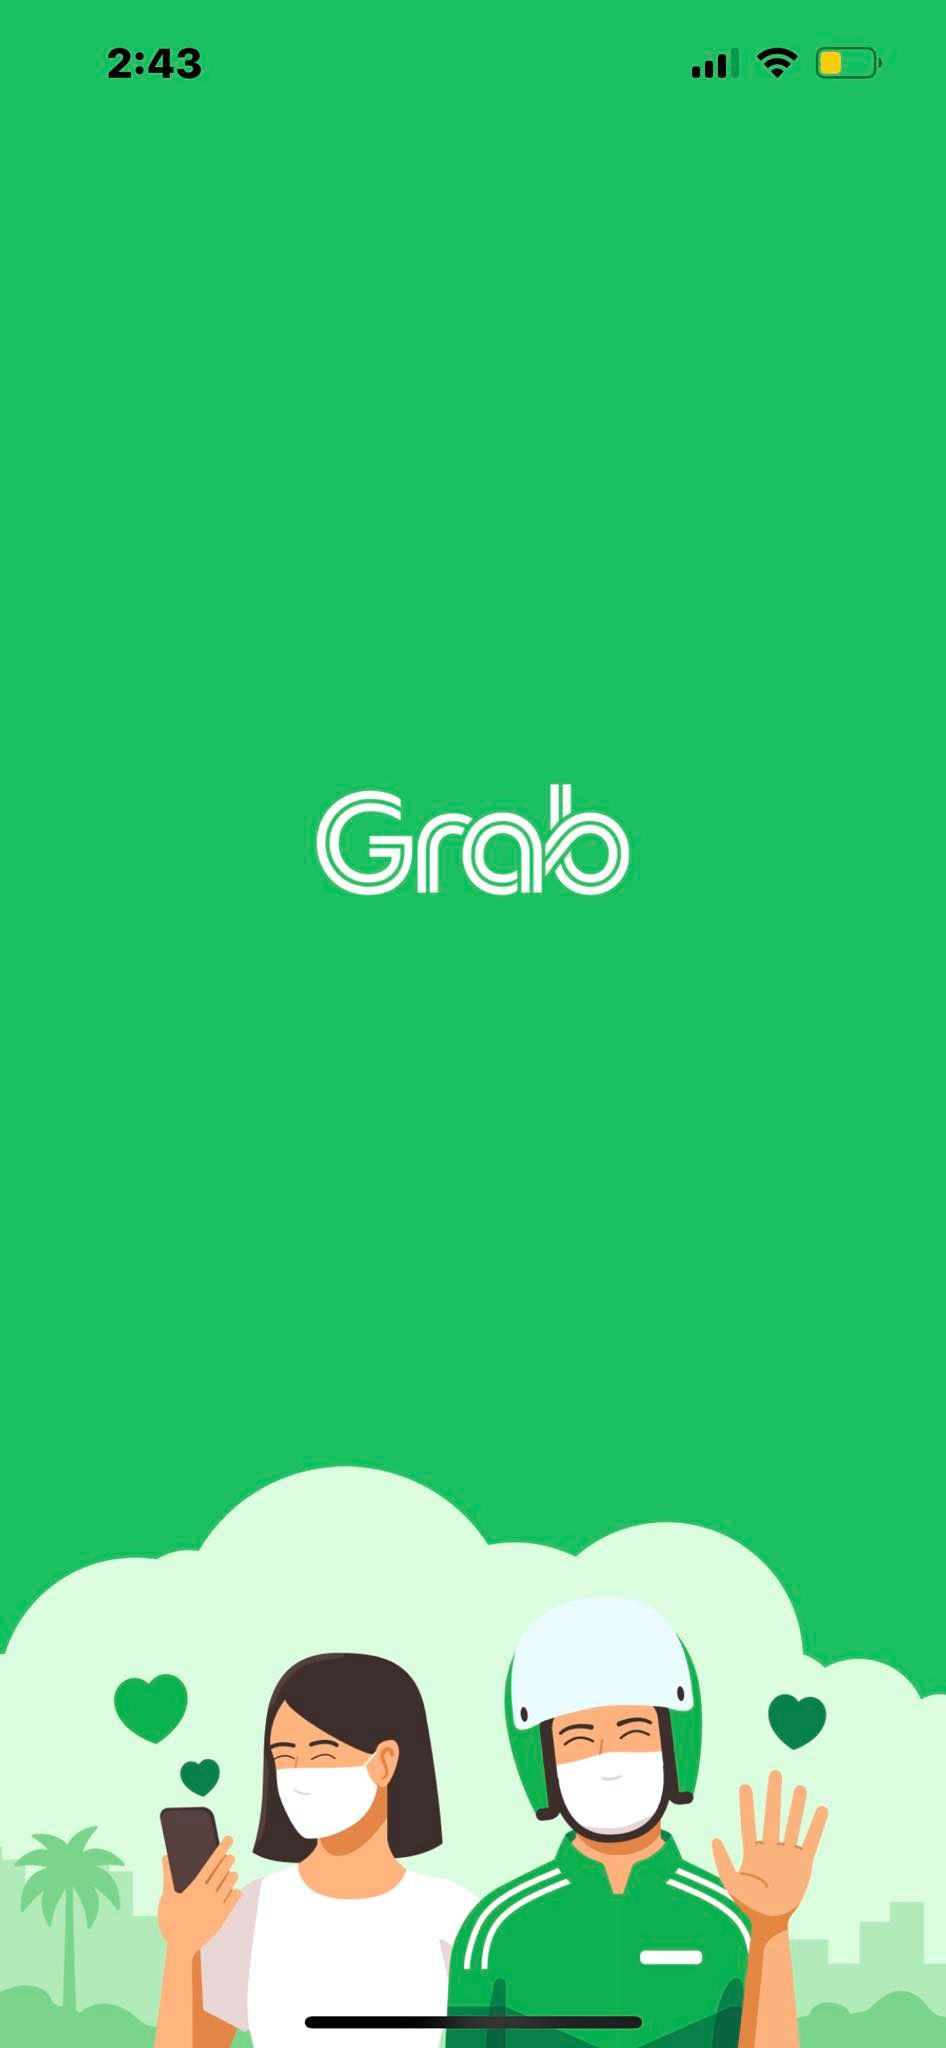 Opening the Grab App on iOS